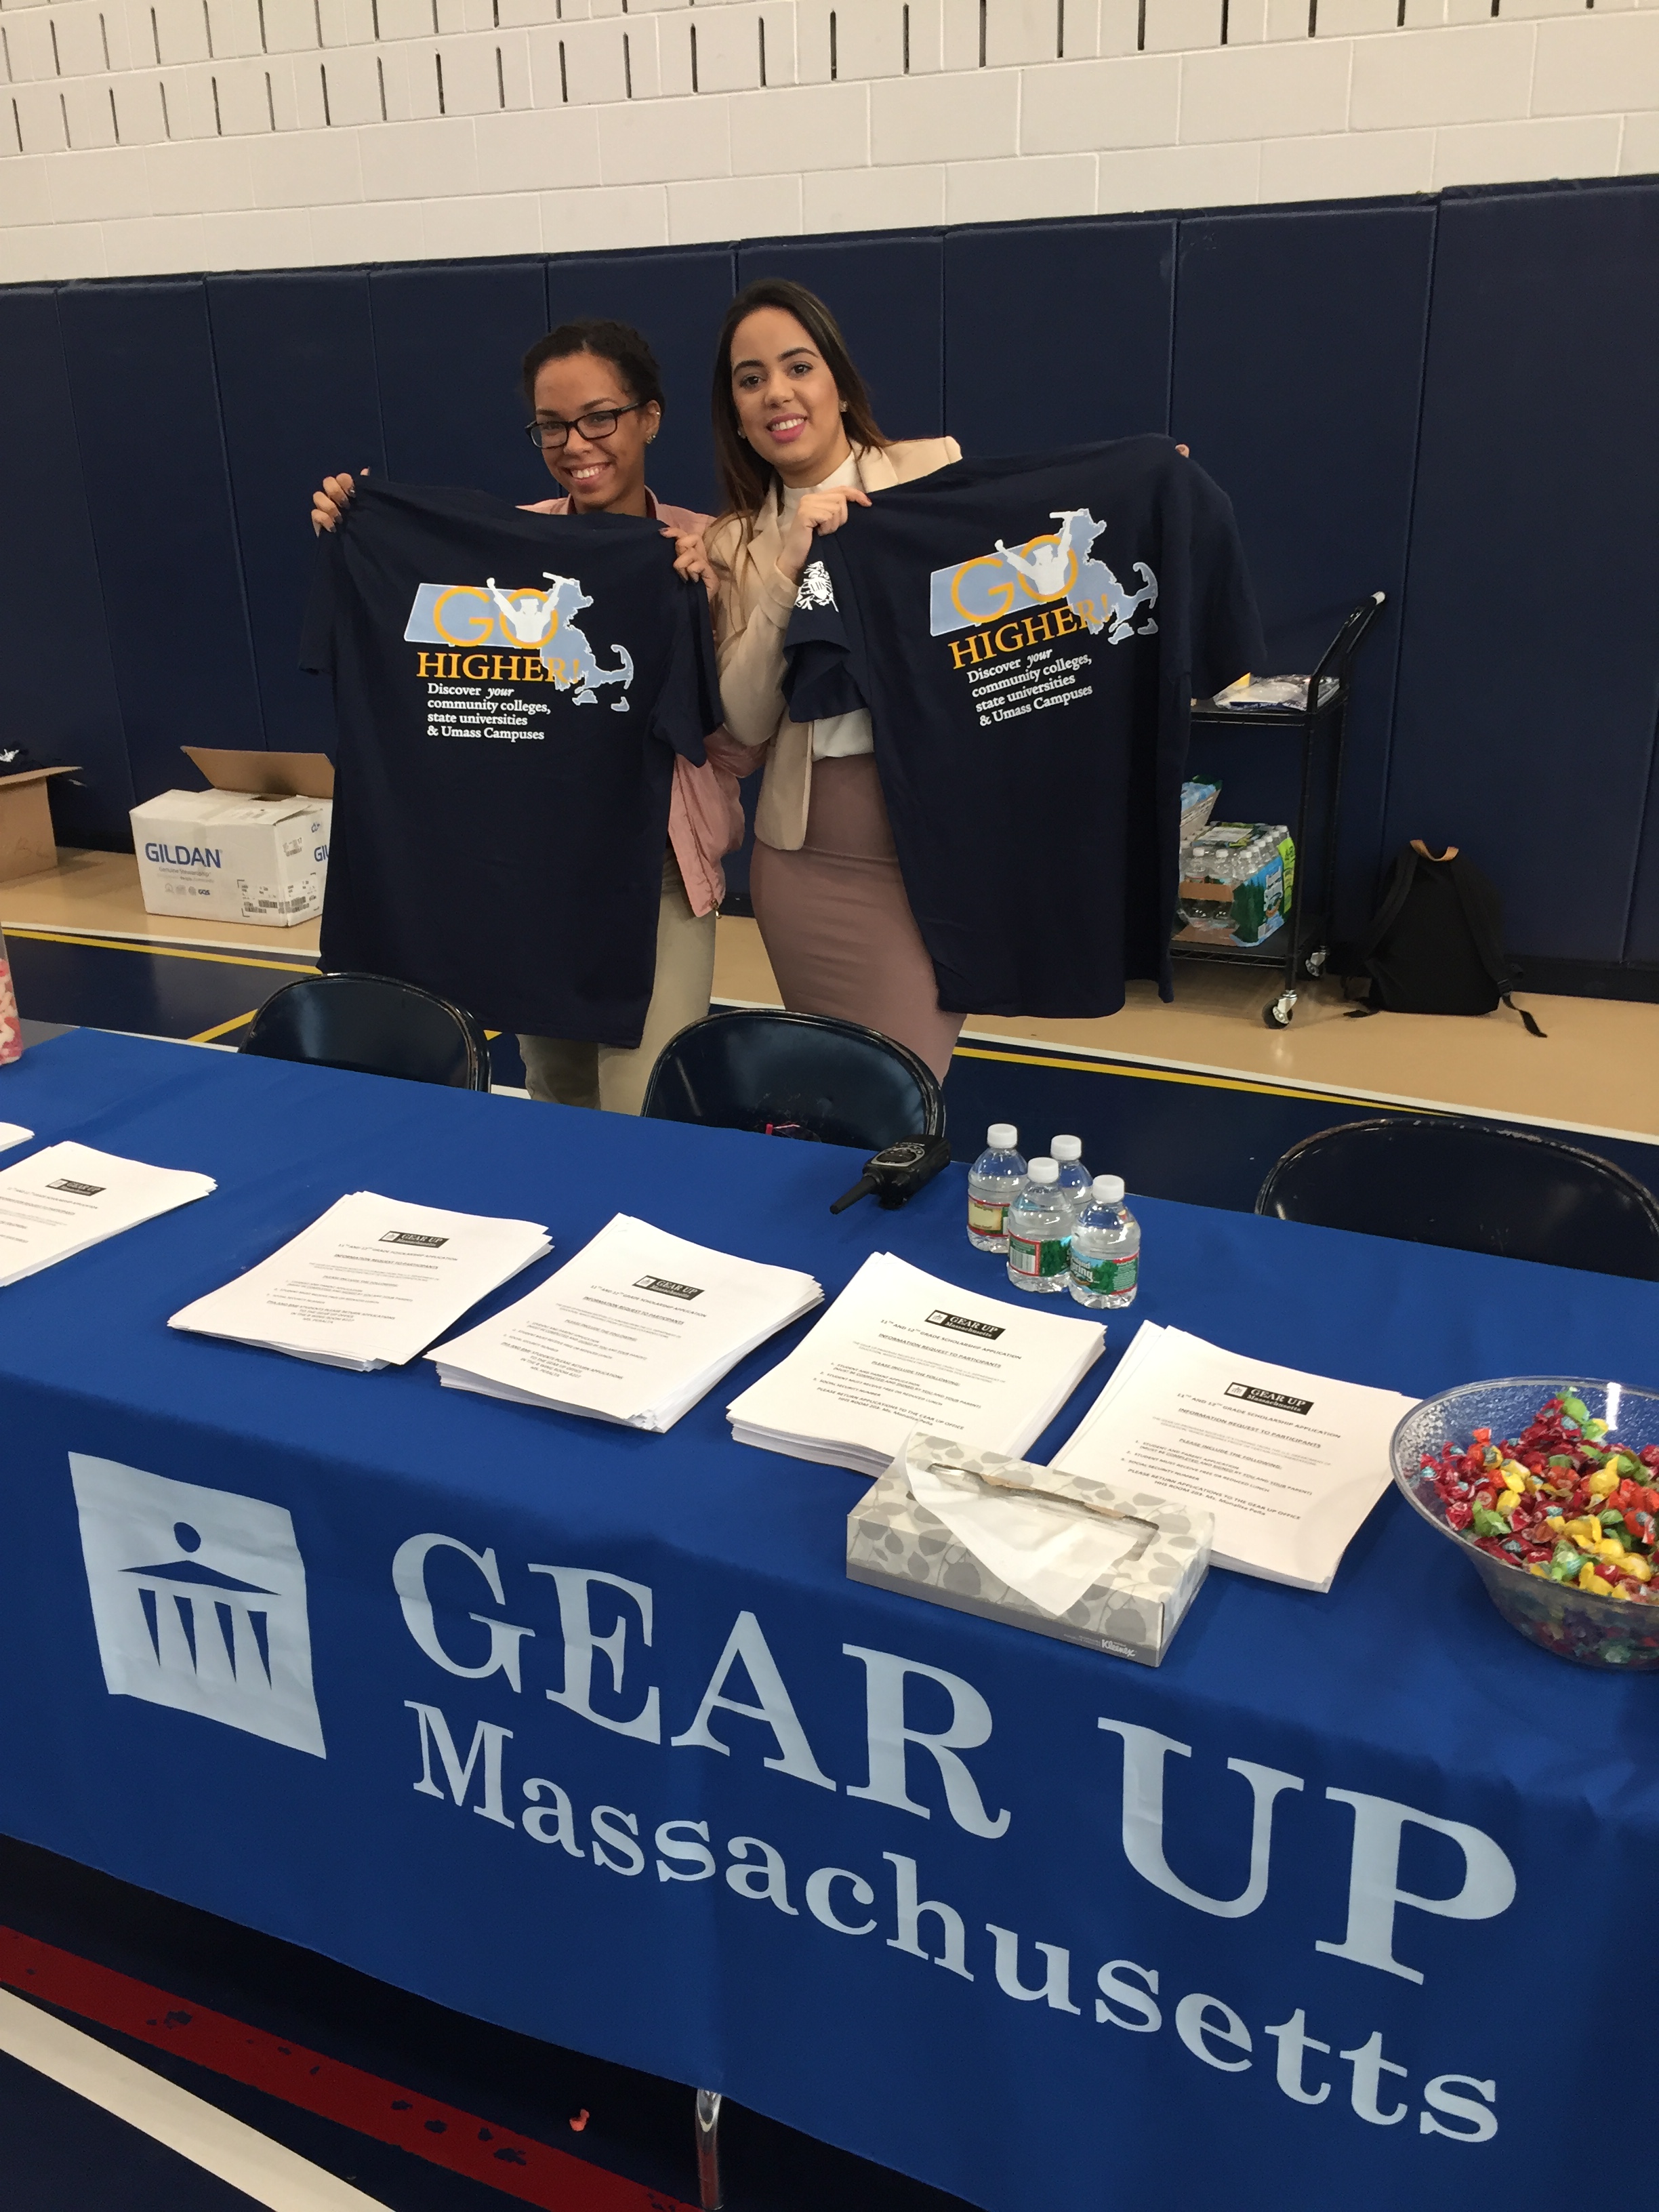 Two people hold up 'Go Higher' t-shirts at the GEAR UP table